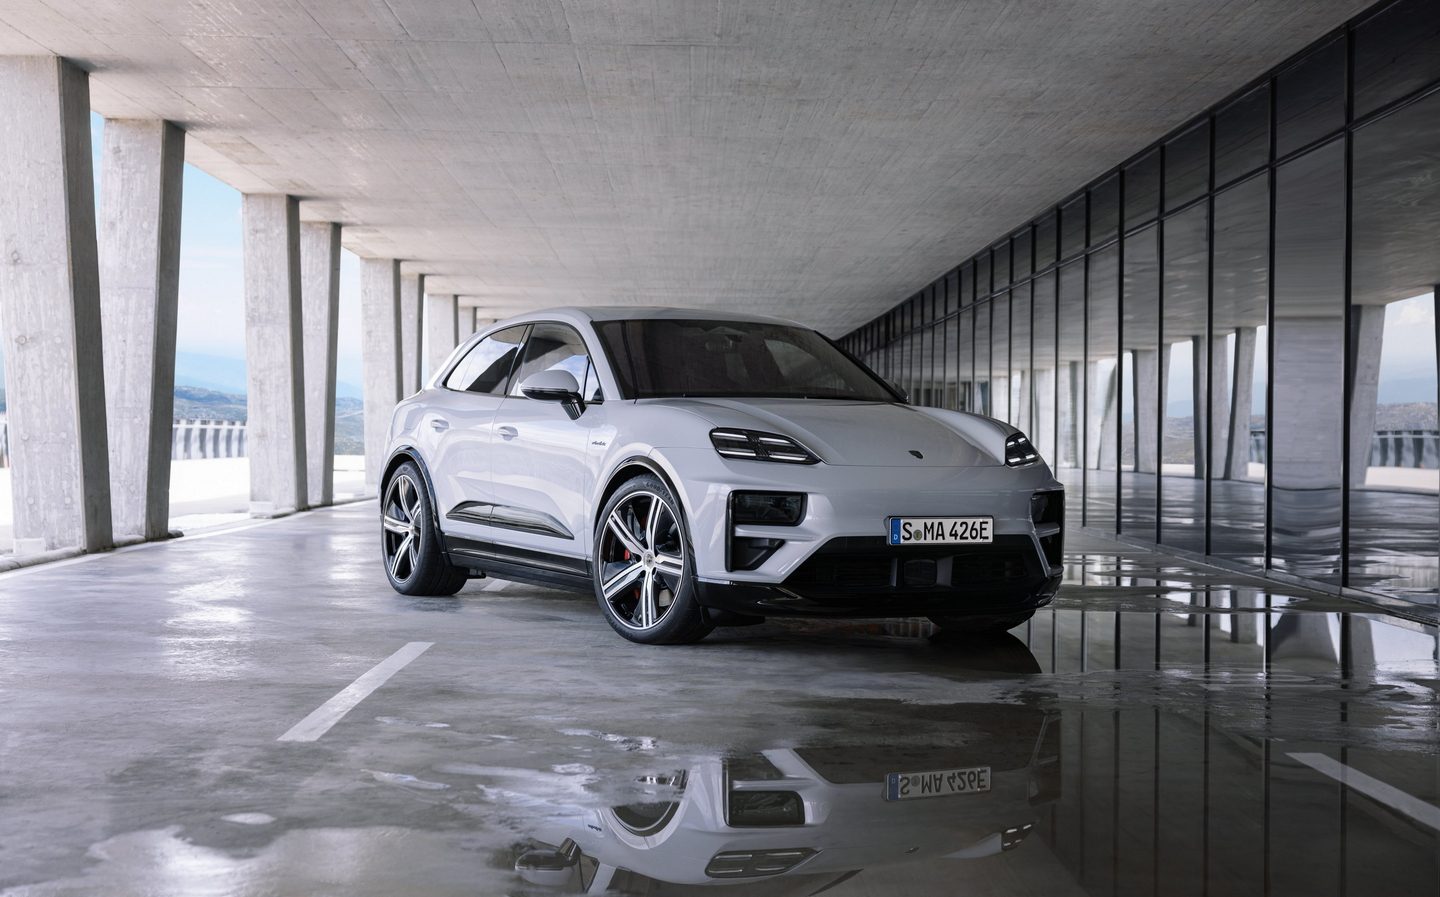 Macan EV Official Macan EV Specs & Pictures Before Reveal! 380 mile range and 630bhp Porsche-Macan-Turbo-electric-2024-002